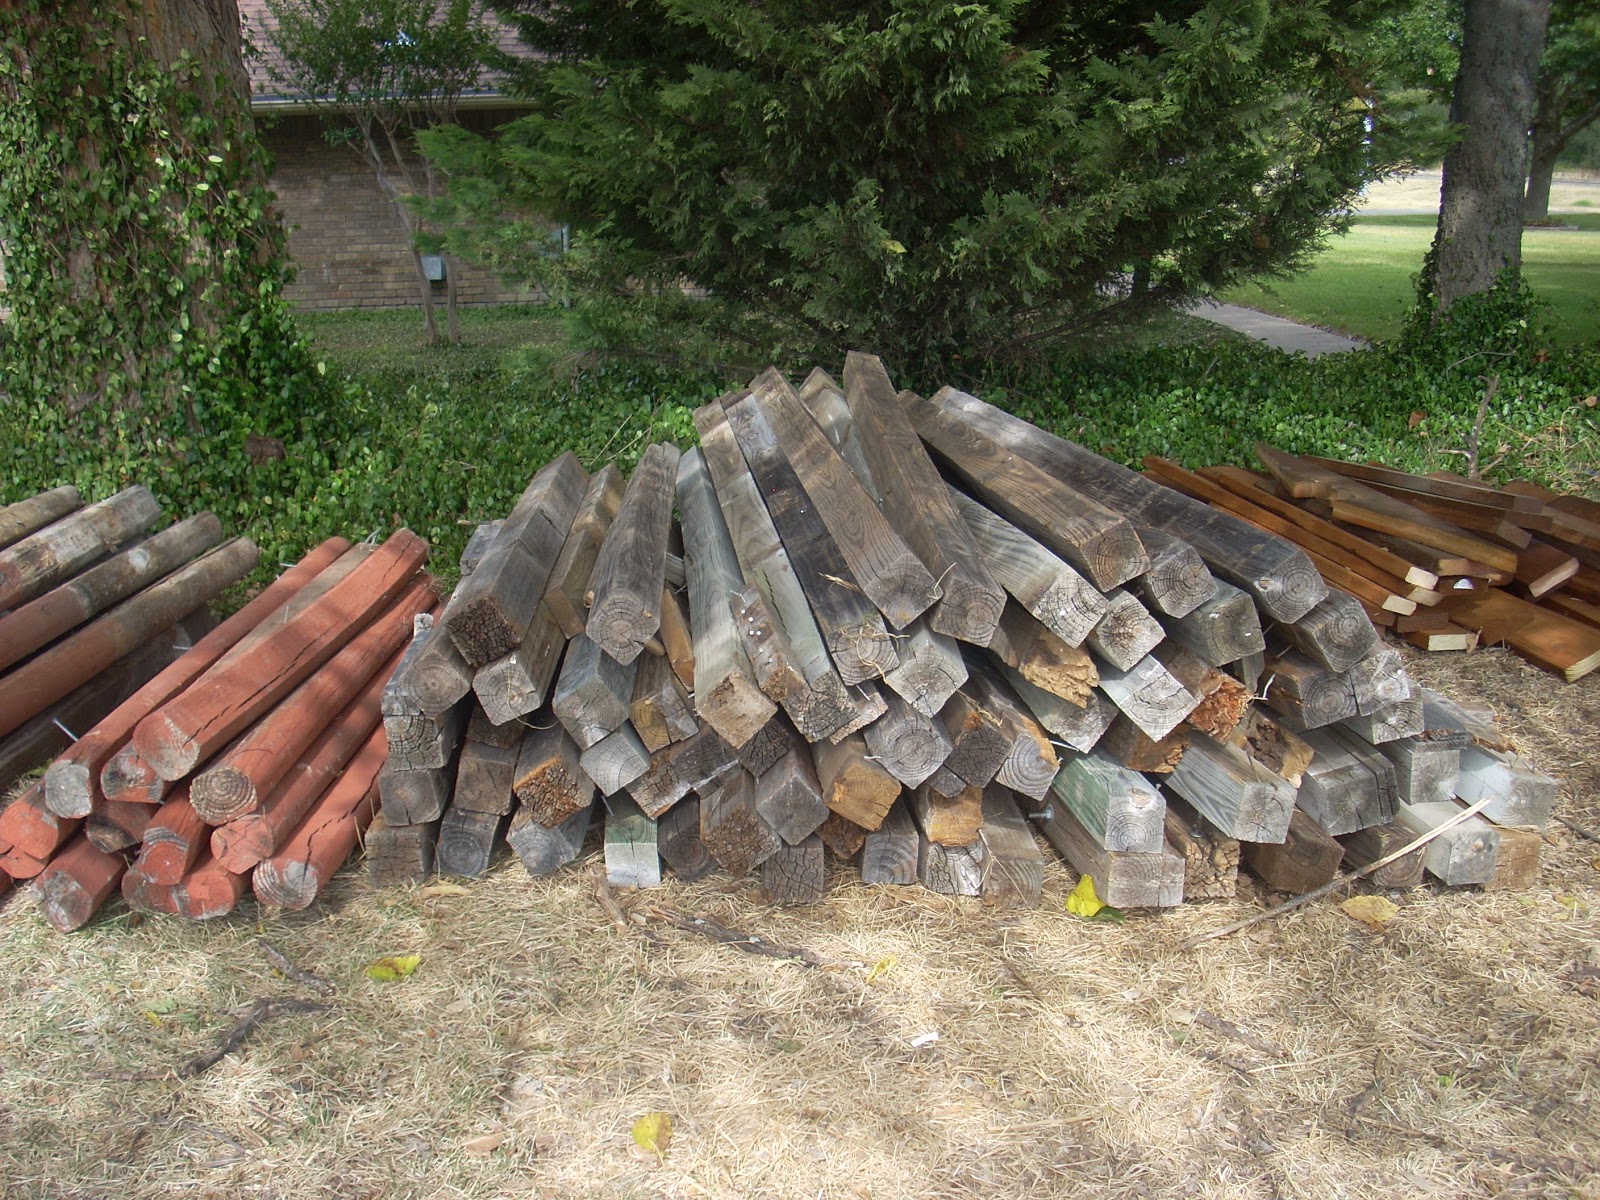 Parker Road Wood Fence Panels & Pickets Wylie, Texas: Posts 4x4